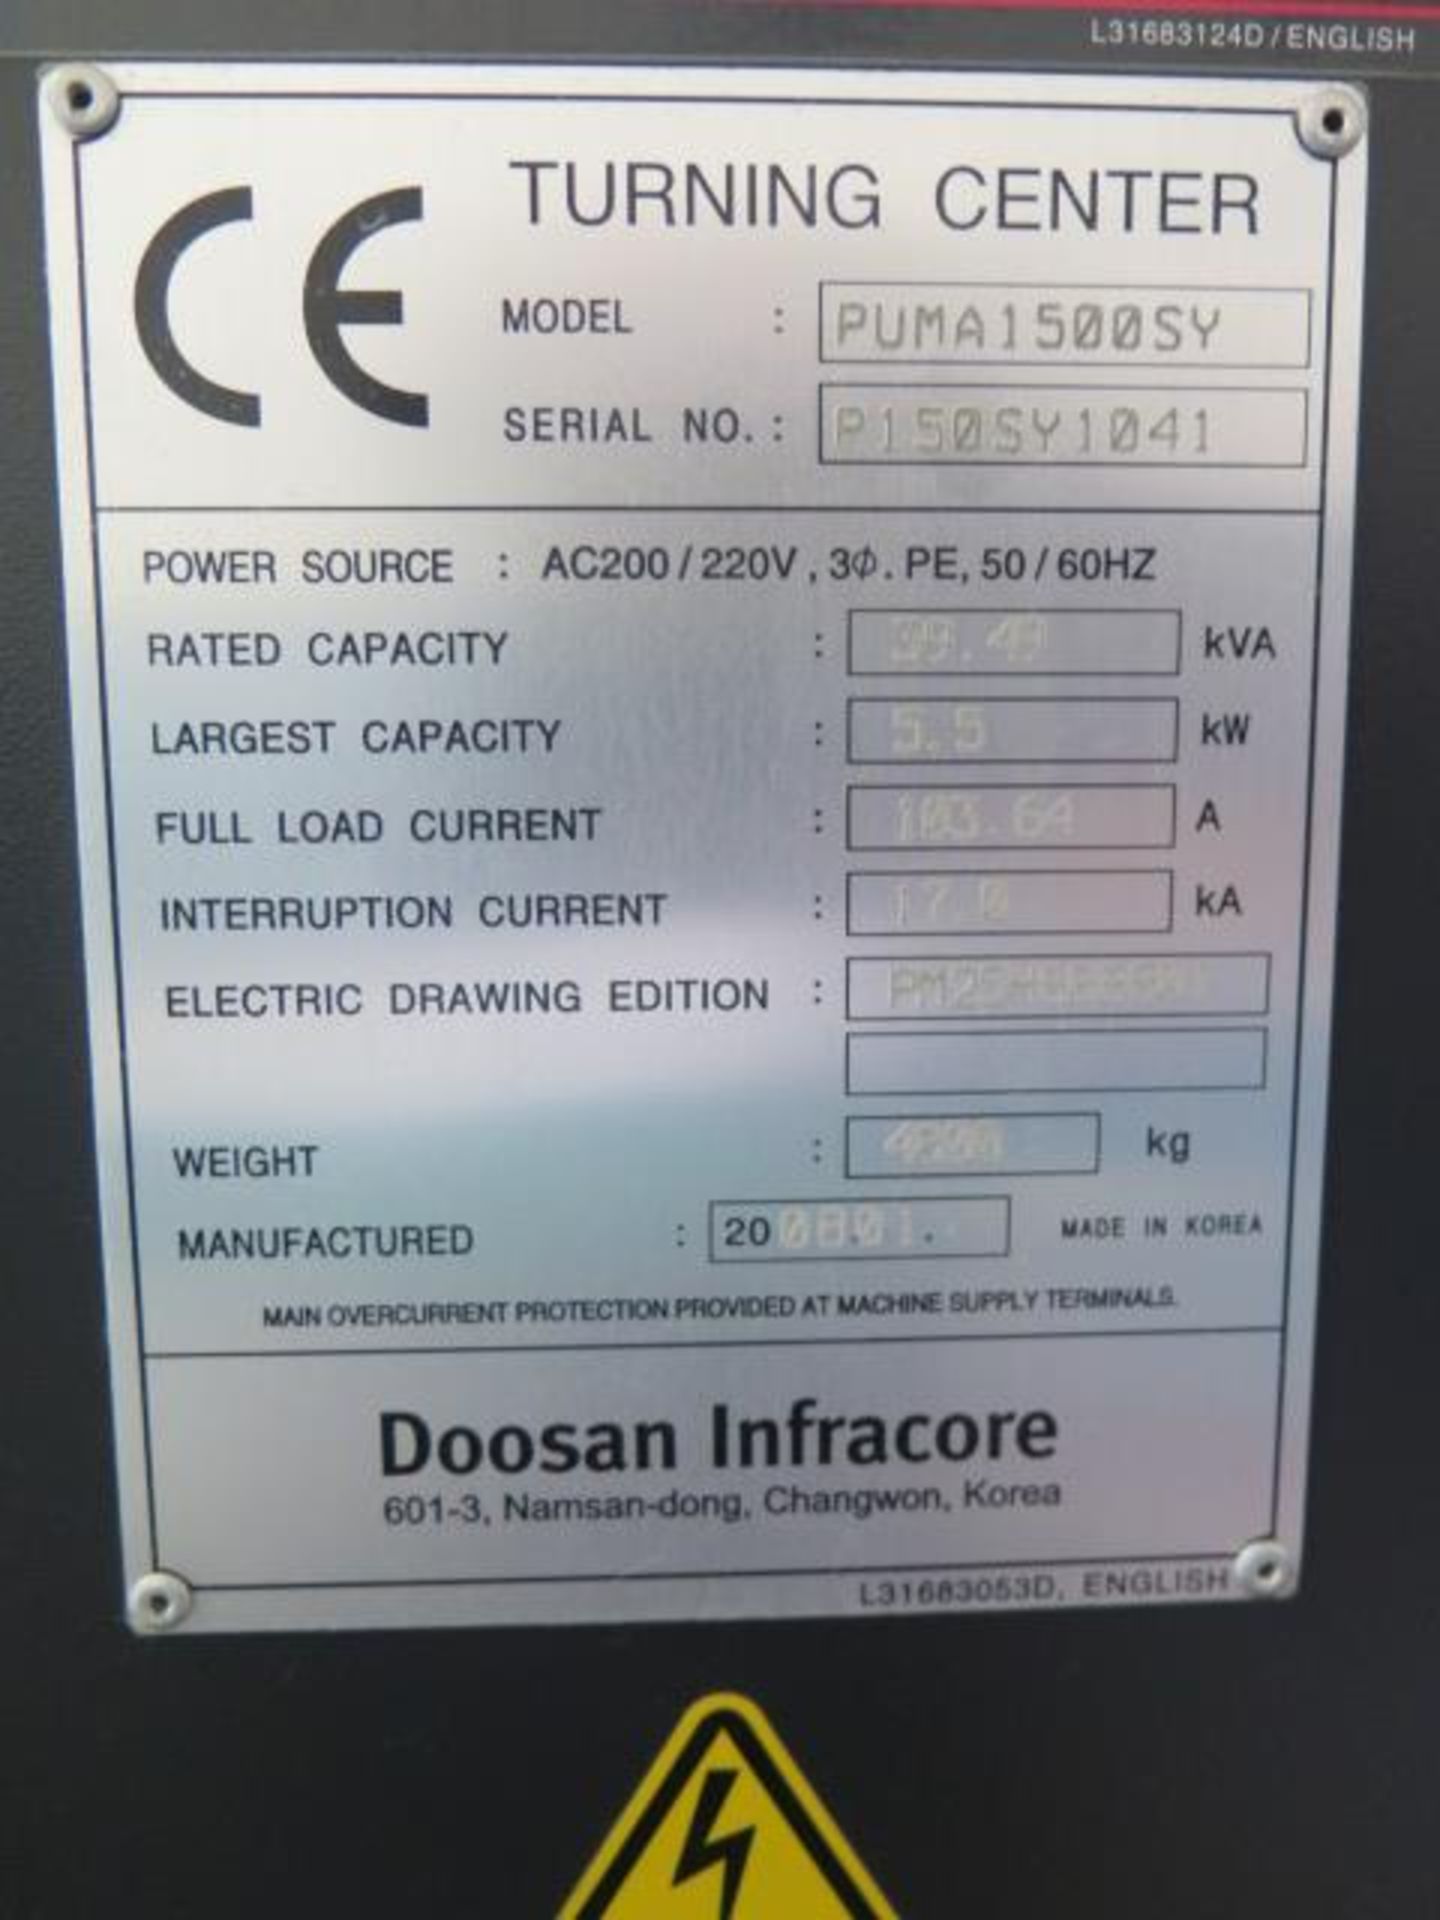 2008 Doosan PUMA 1500SY 5-Axis Twin Spindle Live Turret CNC Turning Center s/n P150SY1041,SOLD AS IS - Image 17 of 17